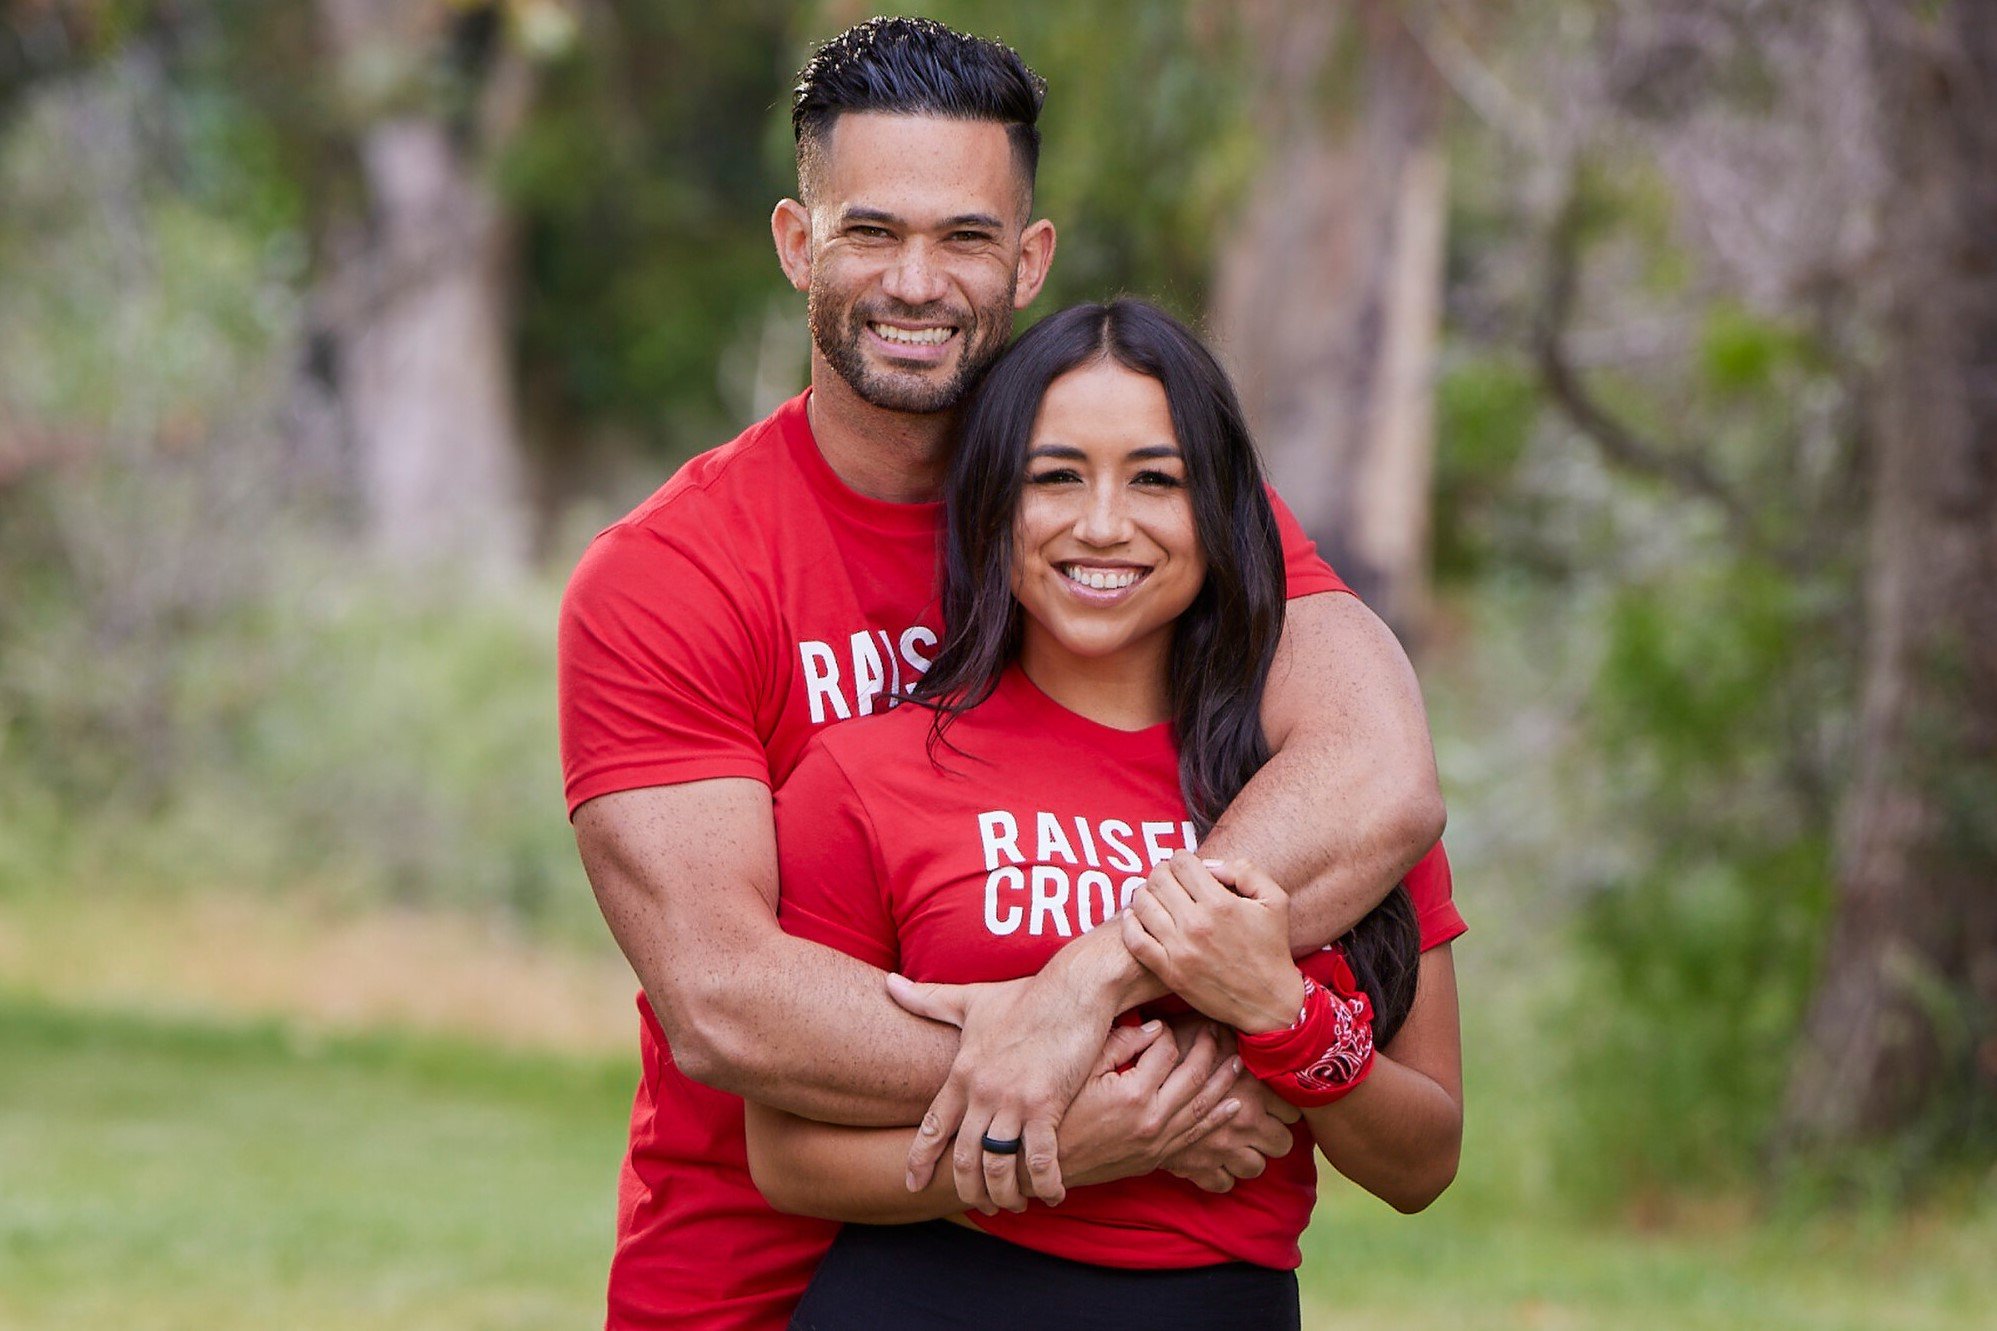 Luis Colon and Michelle Burgos, who star in 'The Amazing Race 34' on CBS, pose for promotional photos. They wear red shirts.